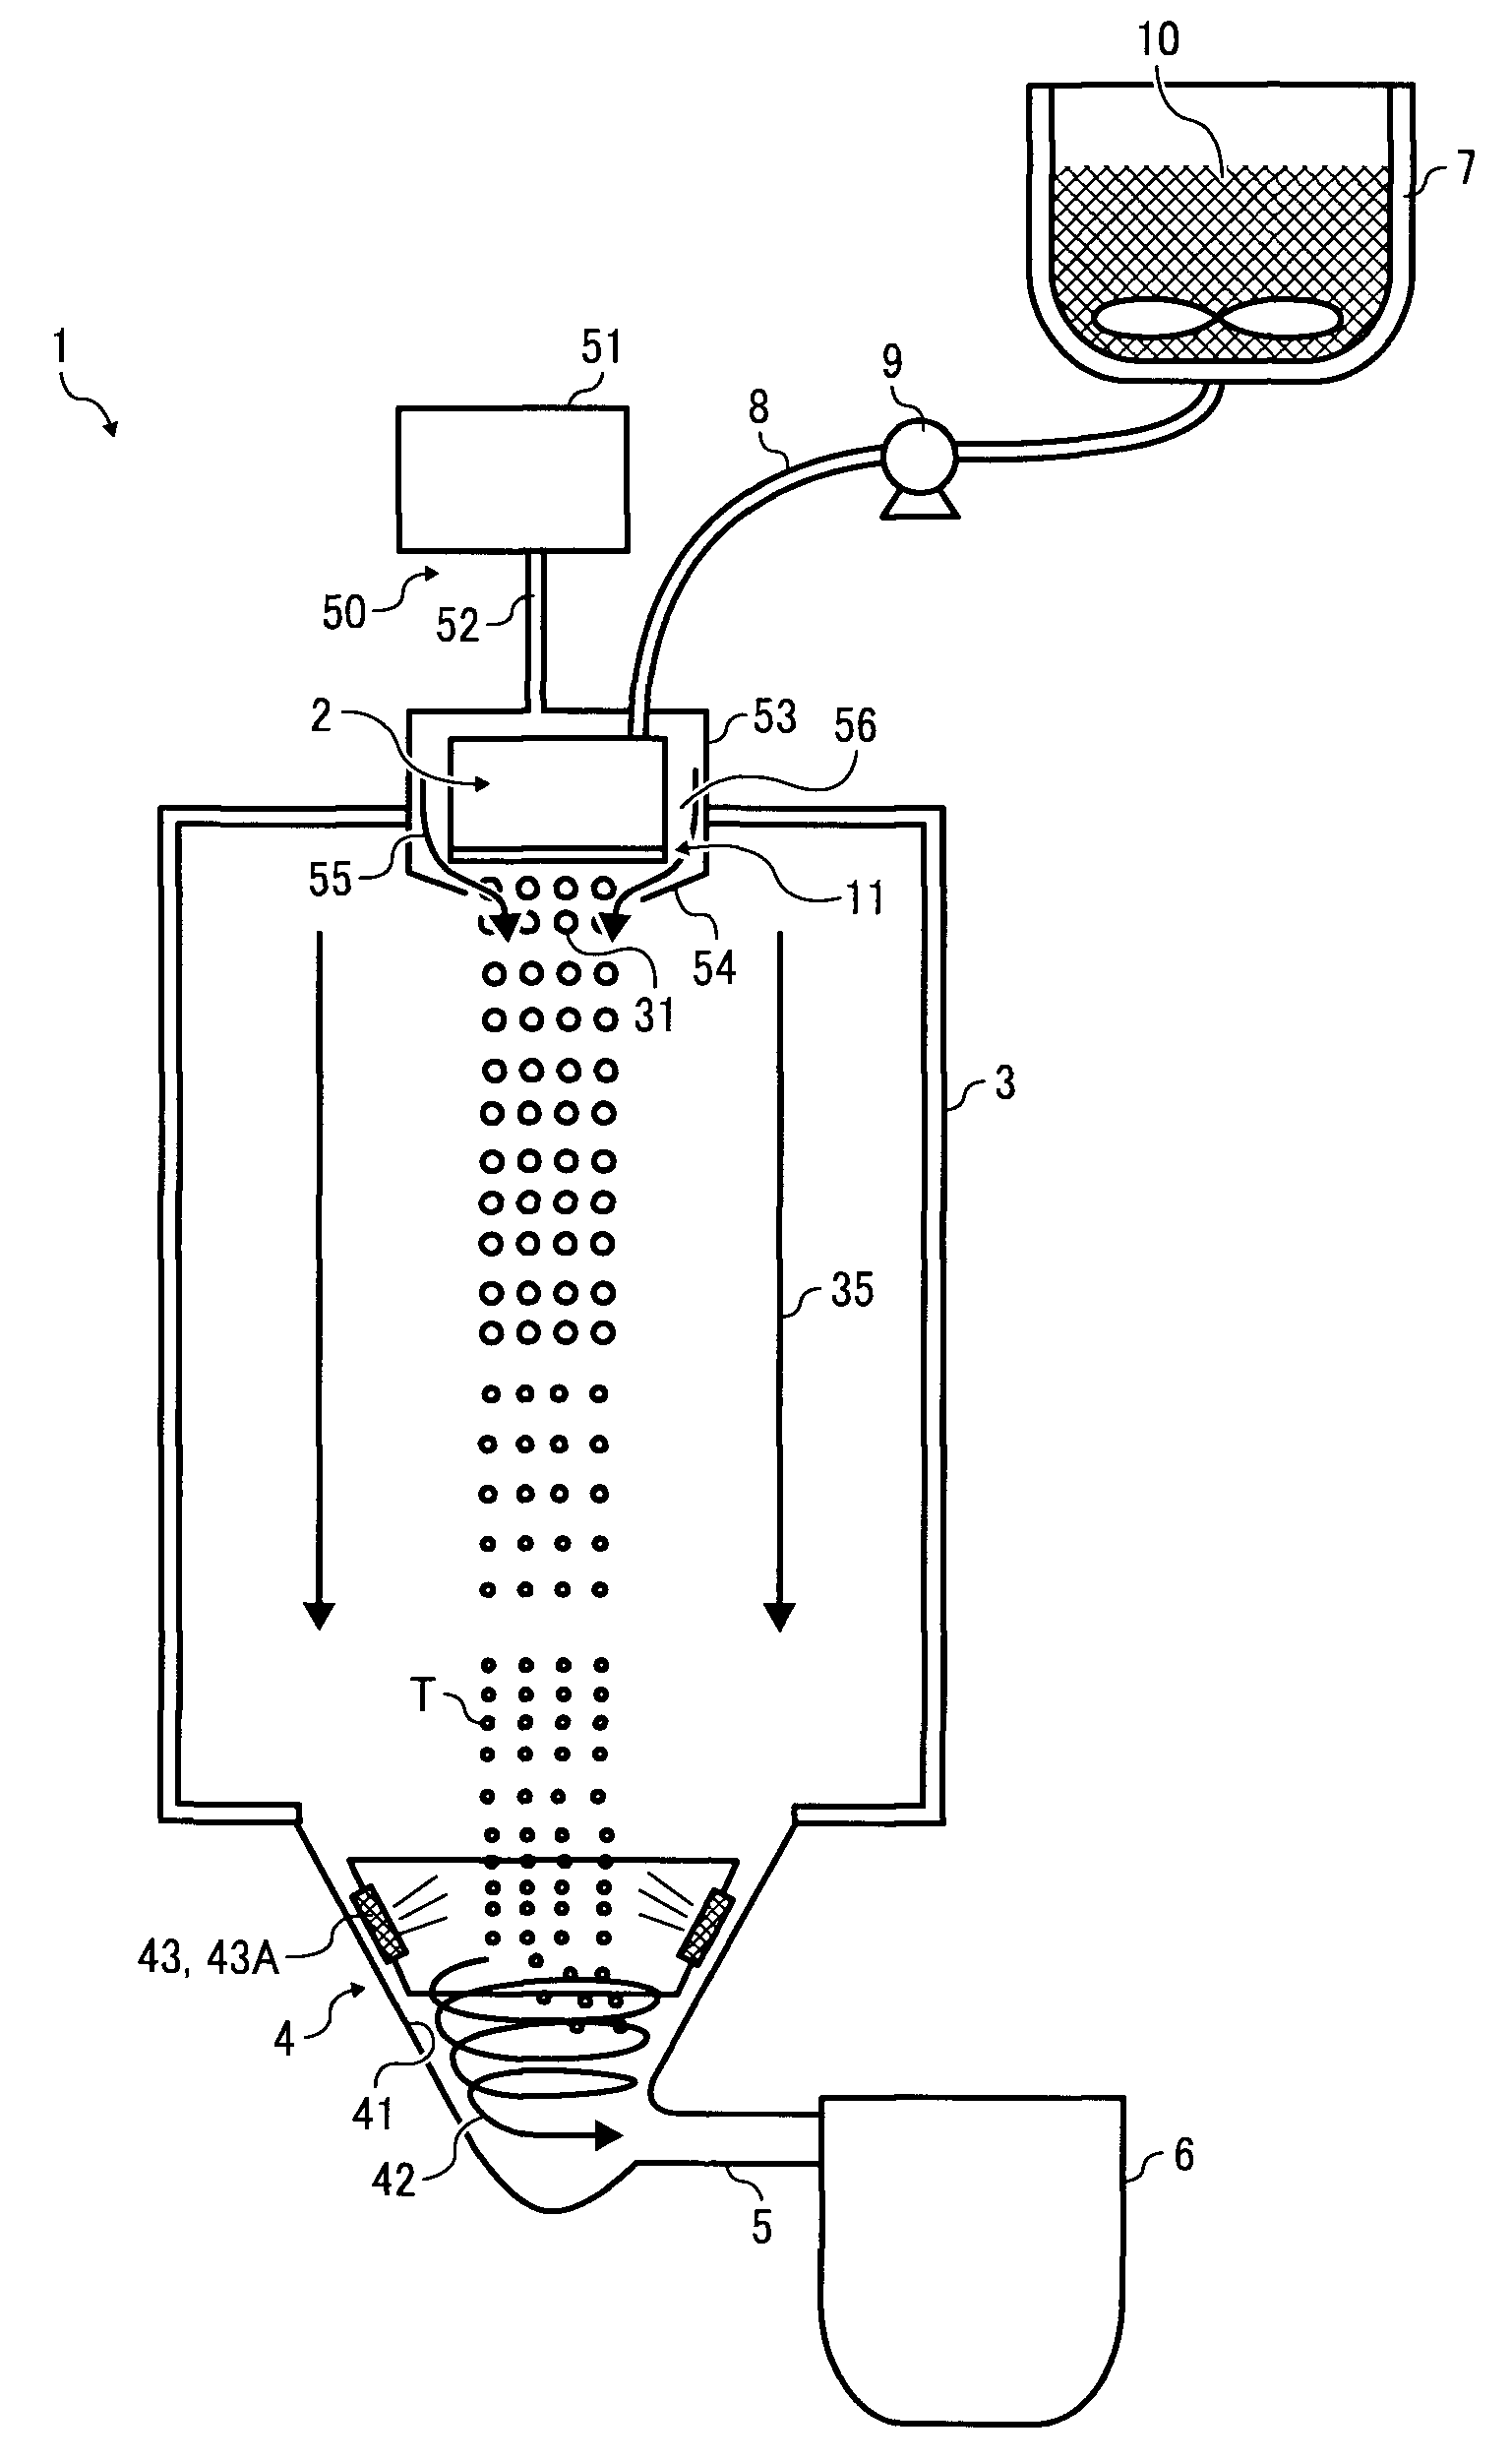 Method and apparatus for manufacturing toner and toner manufactured by the apparatus and method